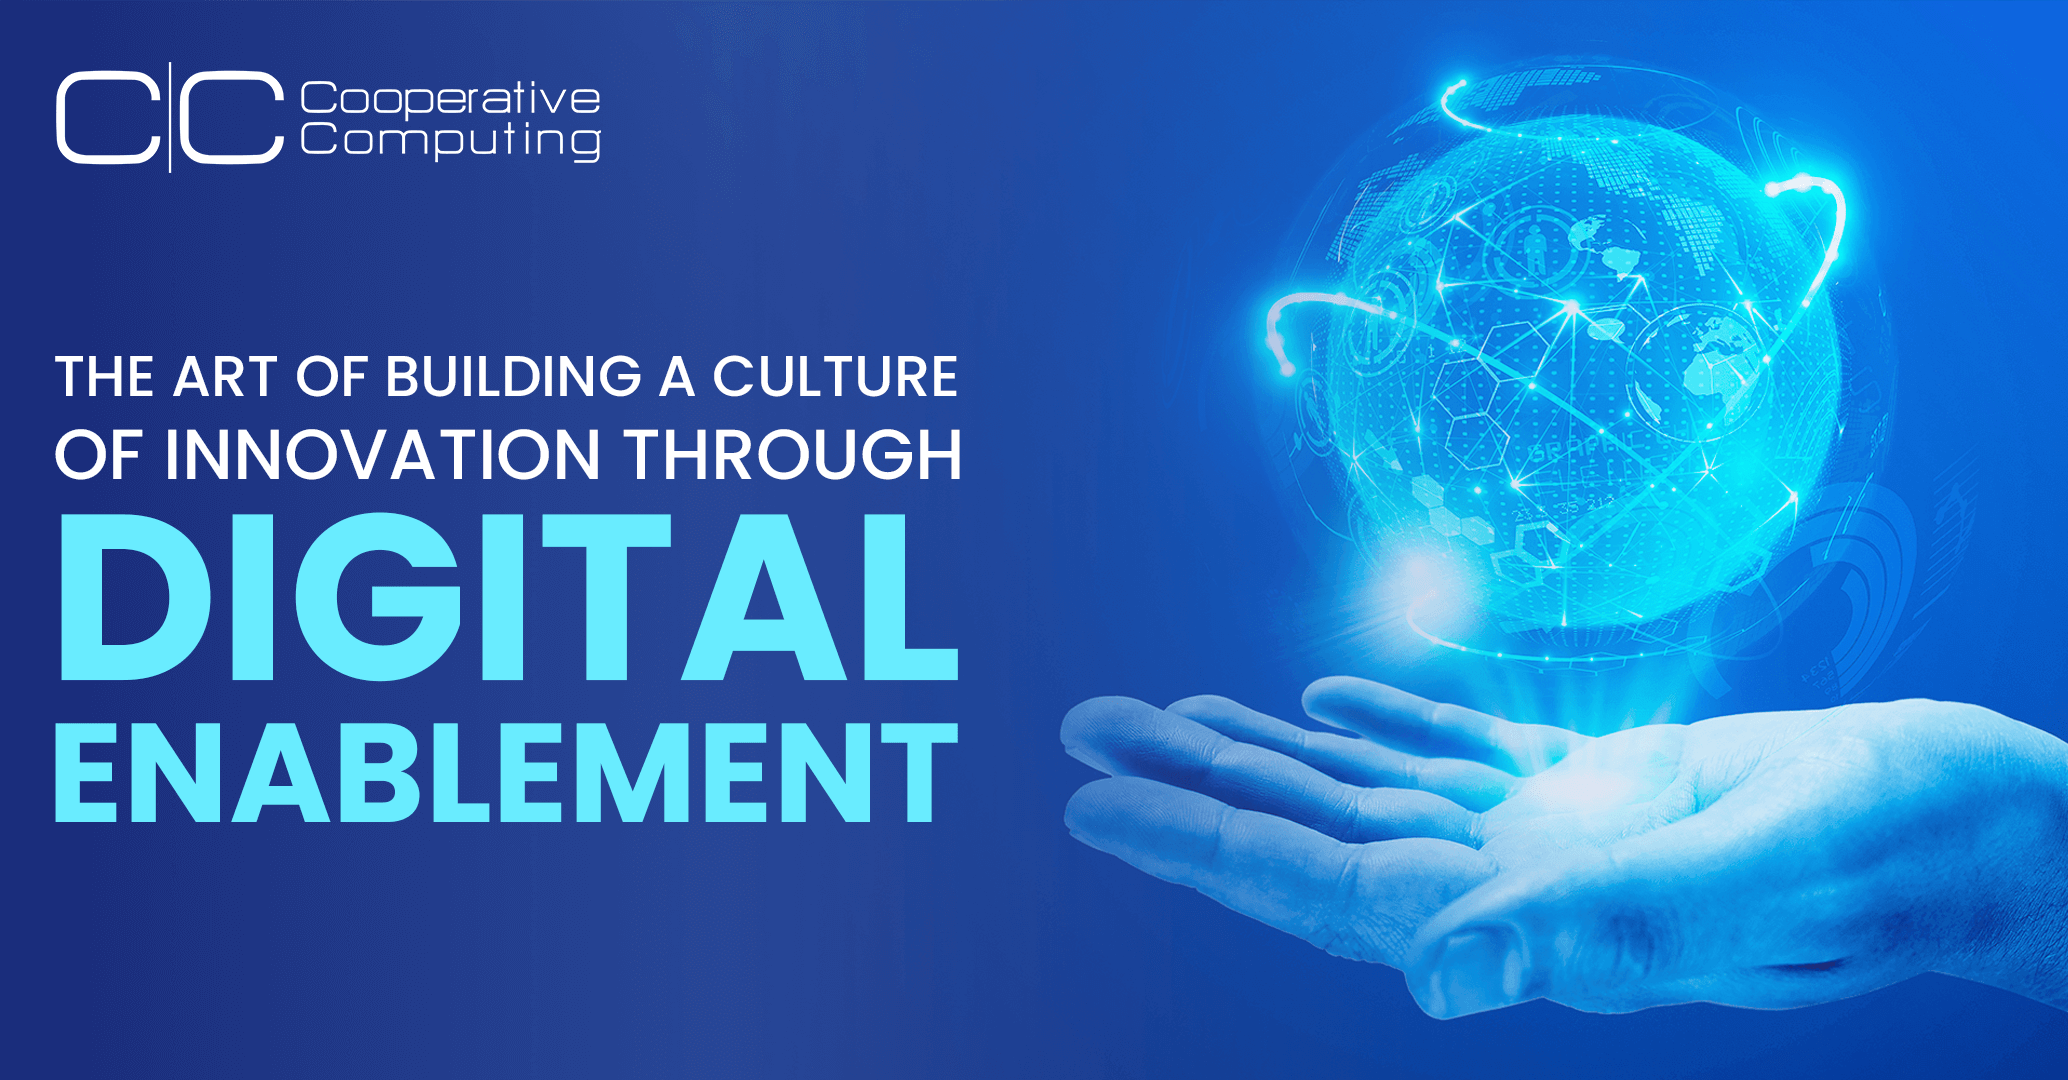 The Art of Building a Culture of Innovation Through Digital Enablement